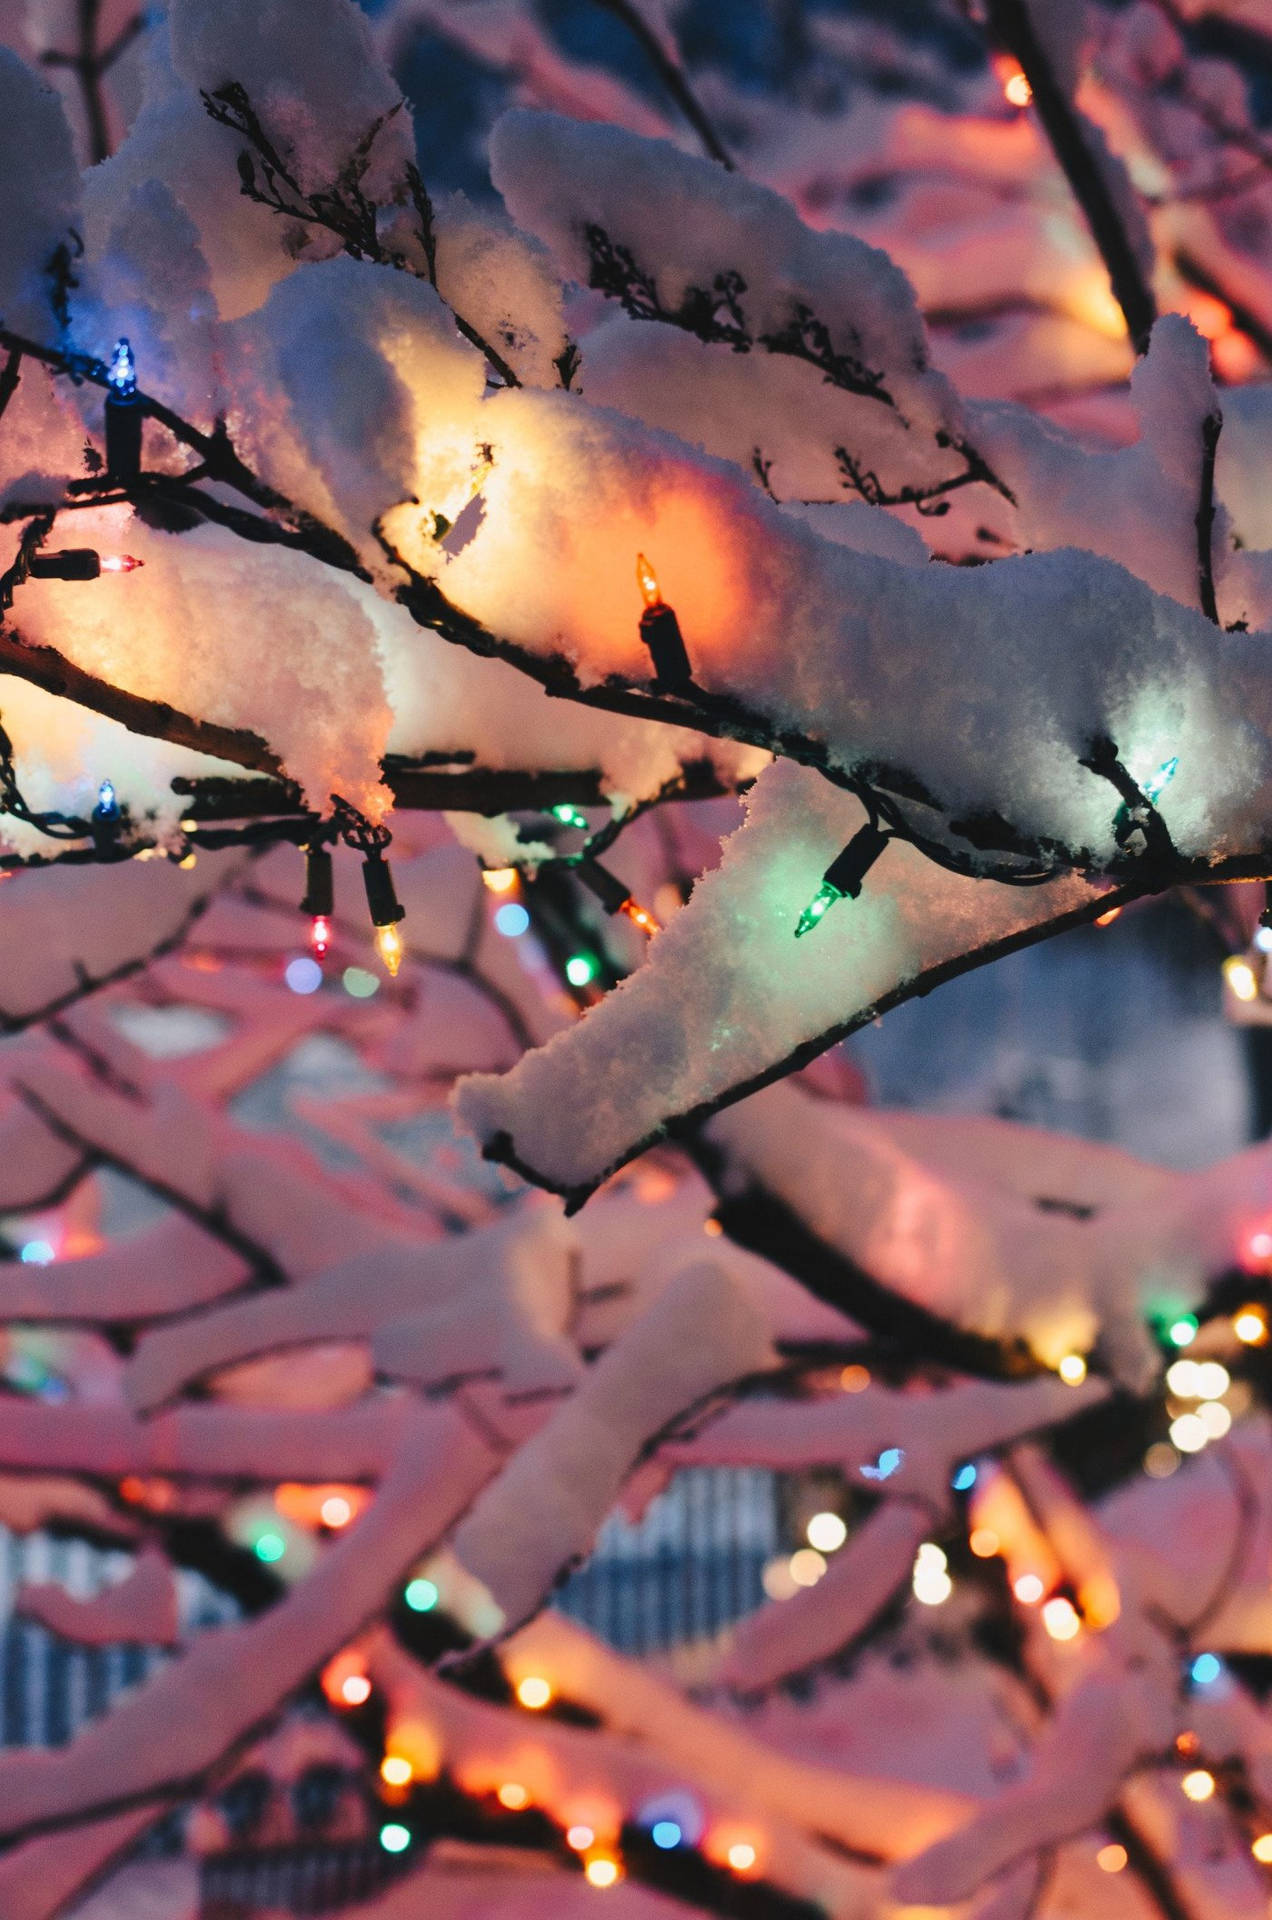 Snow covered branches with Christmas lights in the background. - Christmas lights